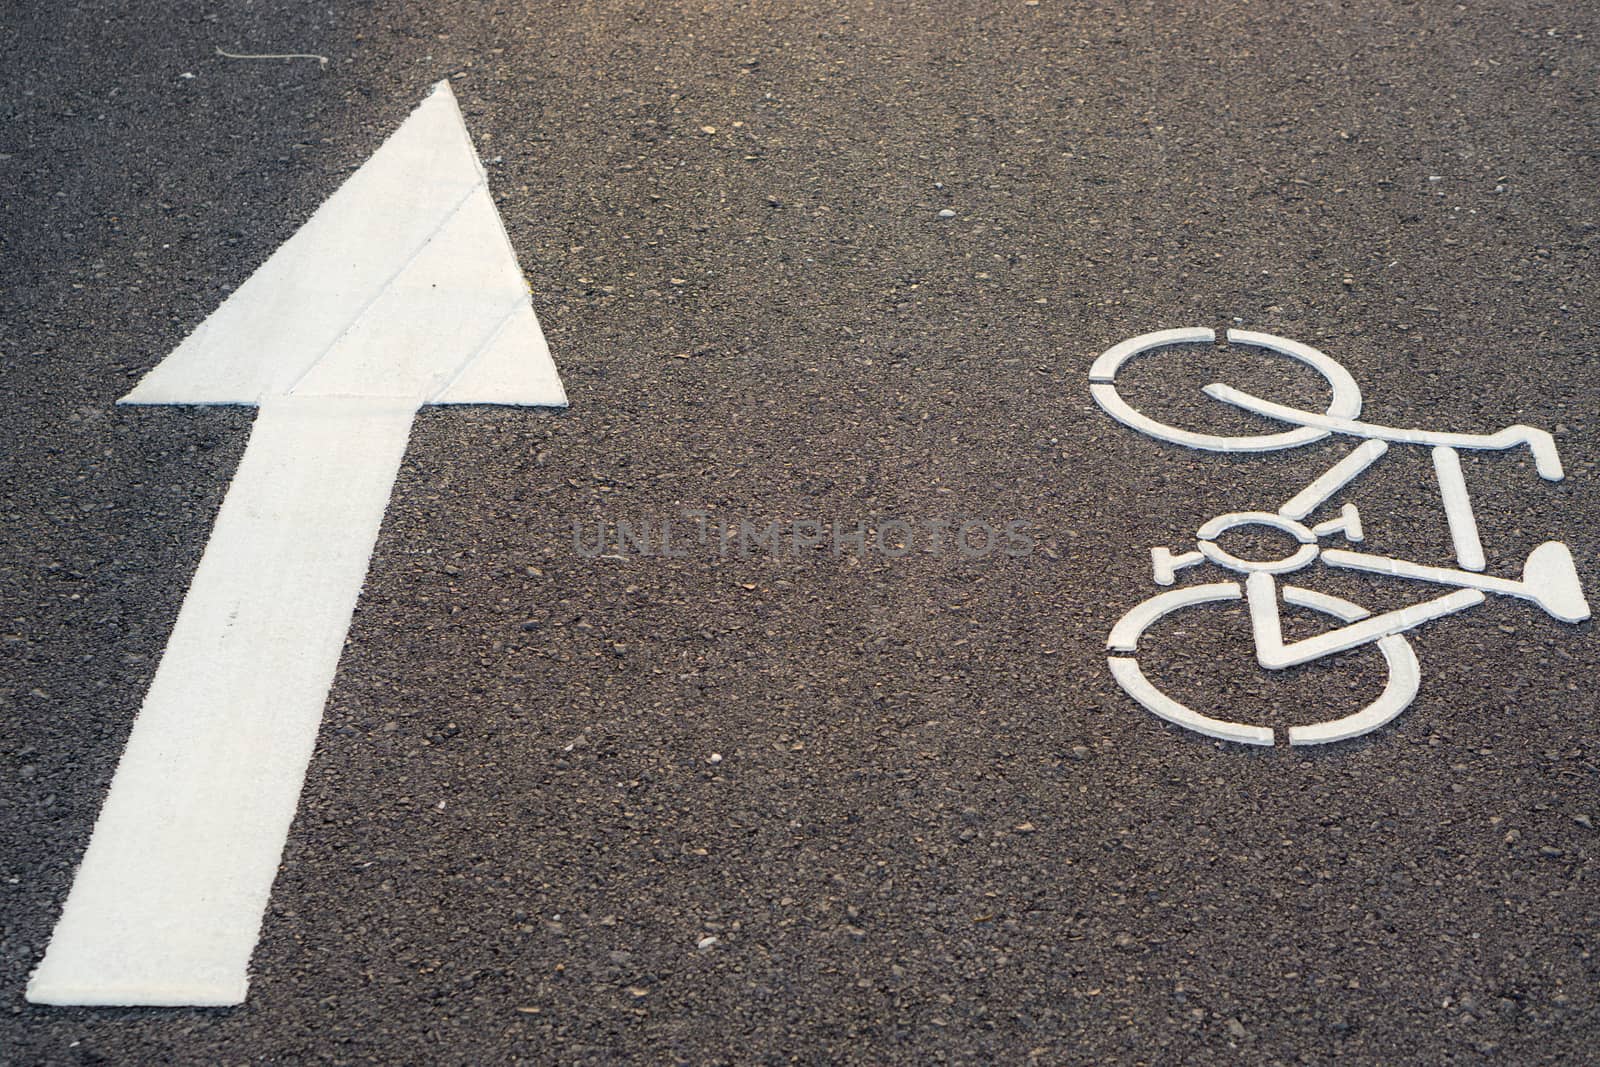 Bicycle lane marking or bike road sign with an arrow on the street in the public park.